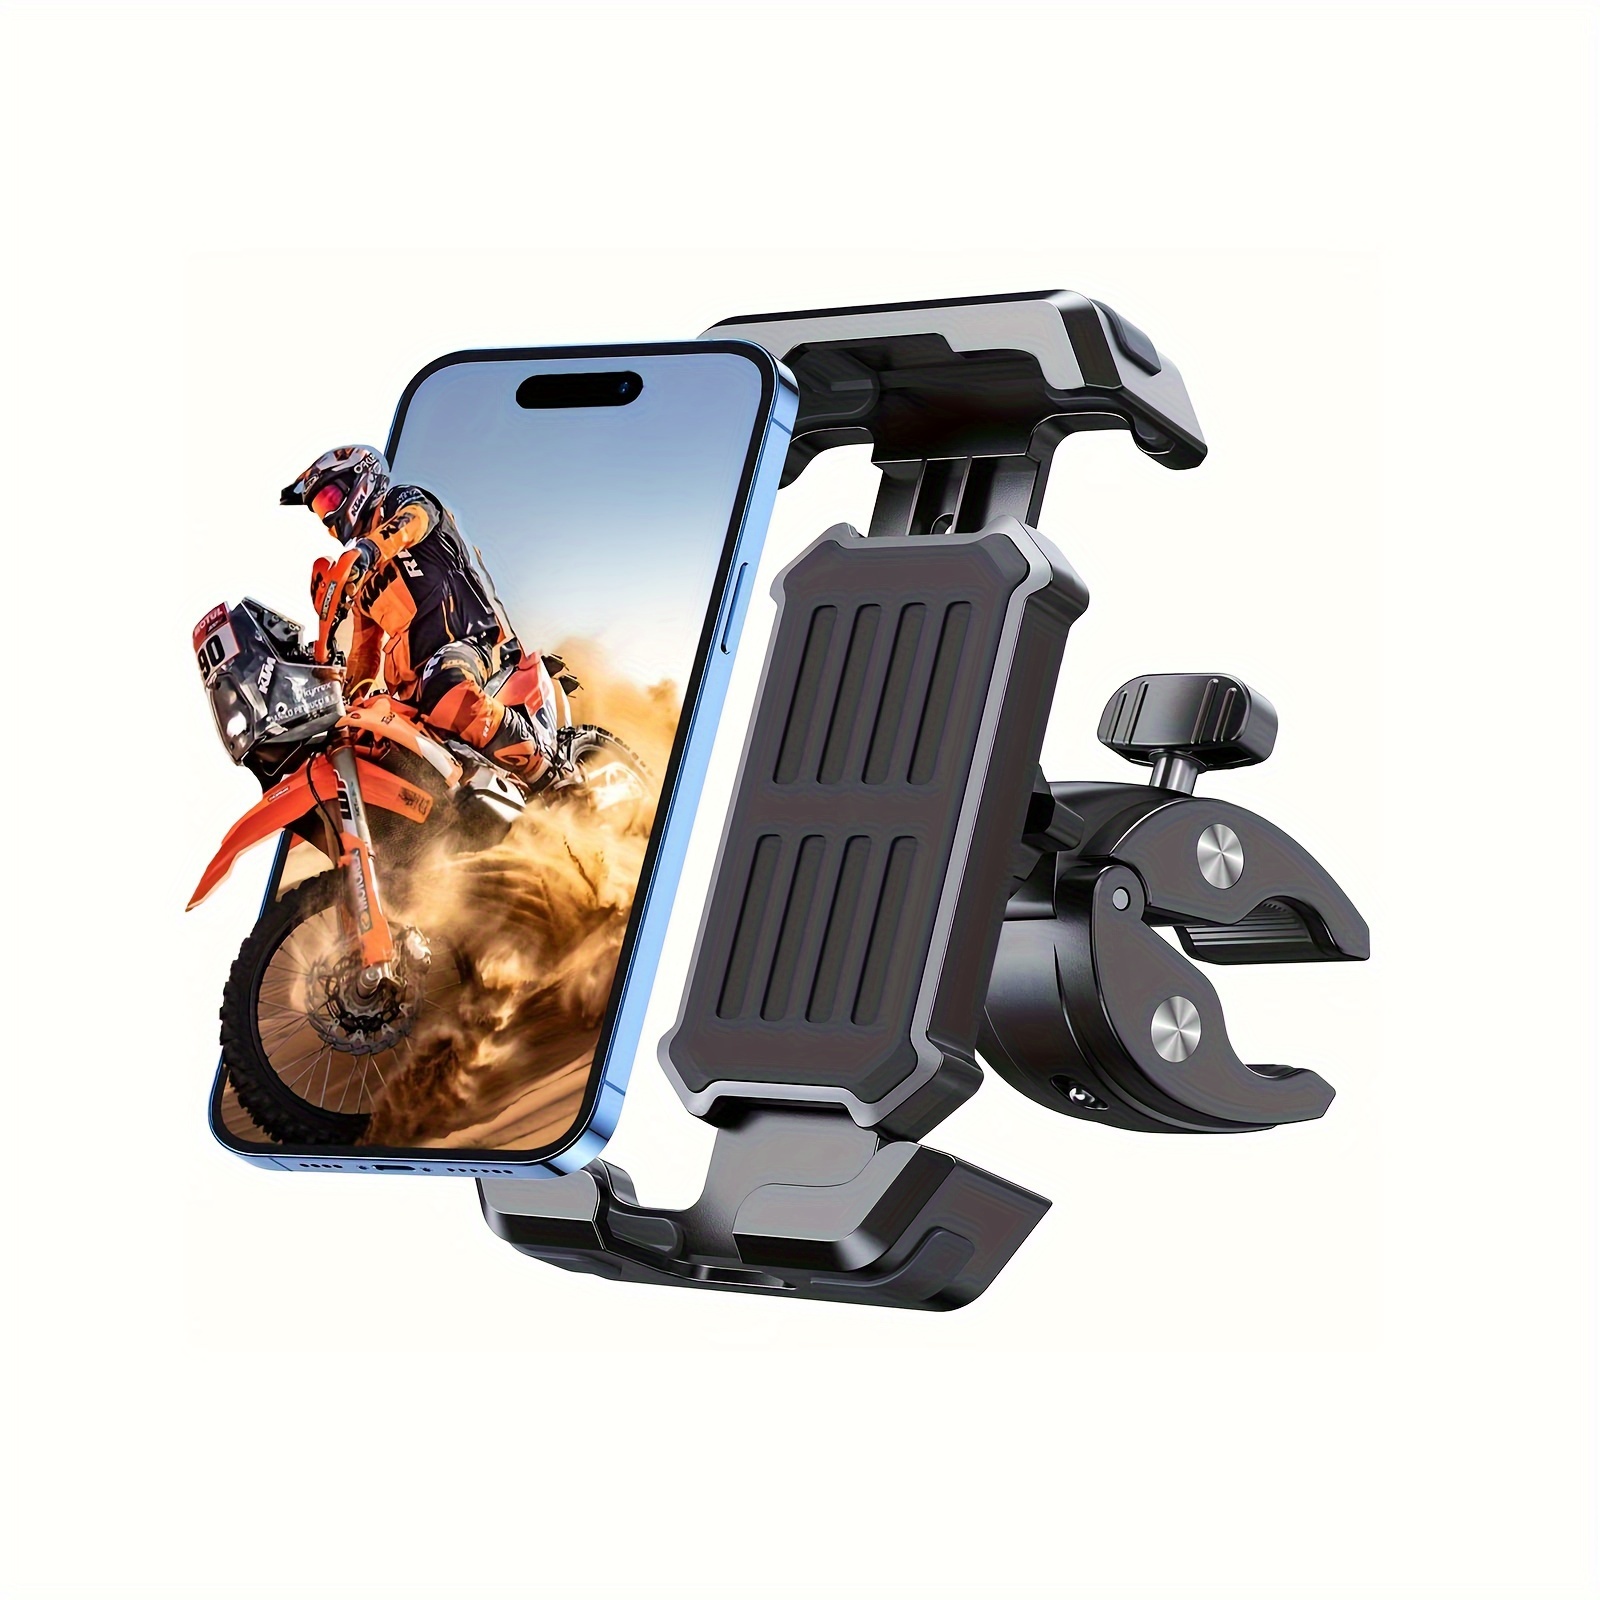 

Bike Phone Mount, [3s Install & Ultimate Anti-vibration] Motorcycle Phone Mount, 360° Rotatable & Upgraded Handlebar Clamp, Bike Phone Holder For Atv/scooter, Compatible With 4.7-6.8" Phones